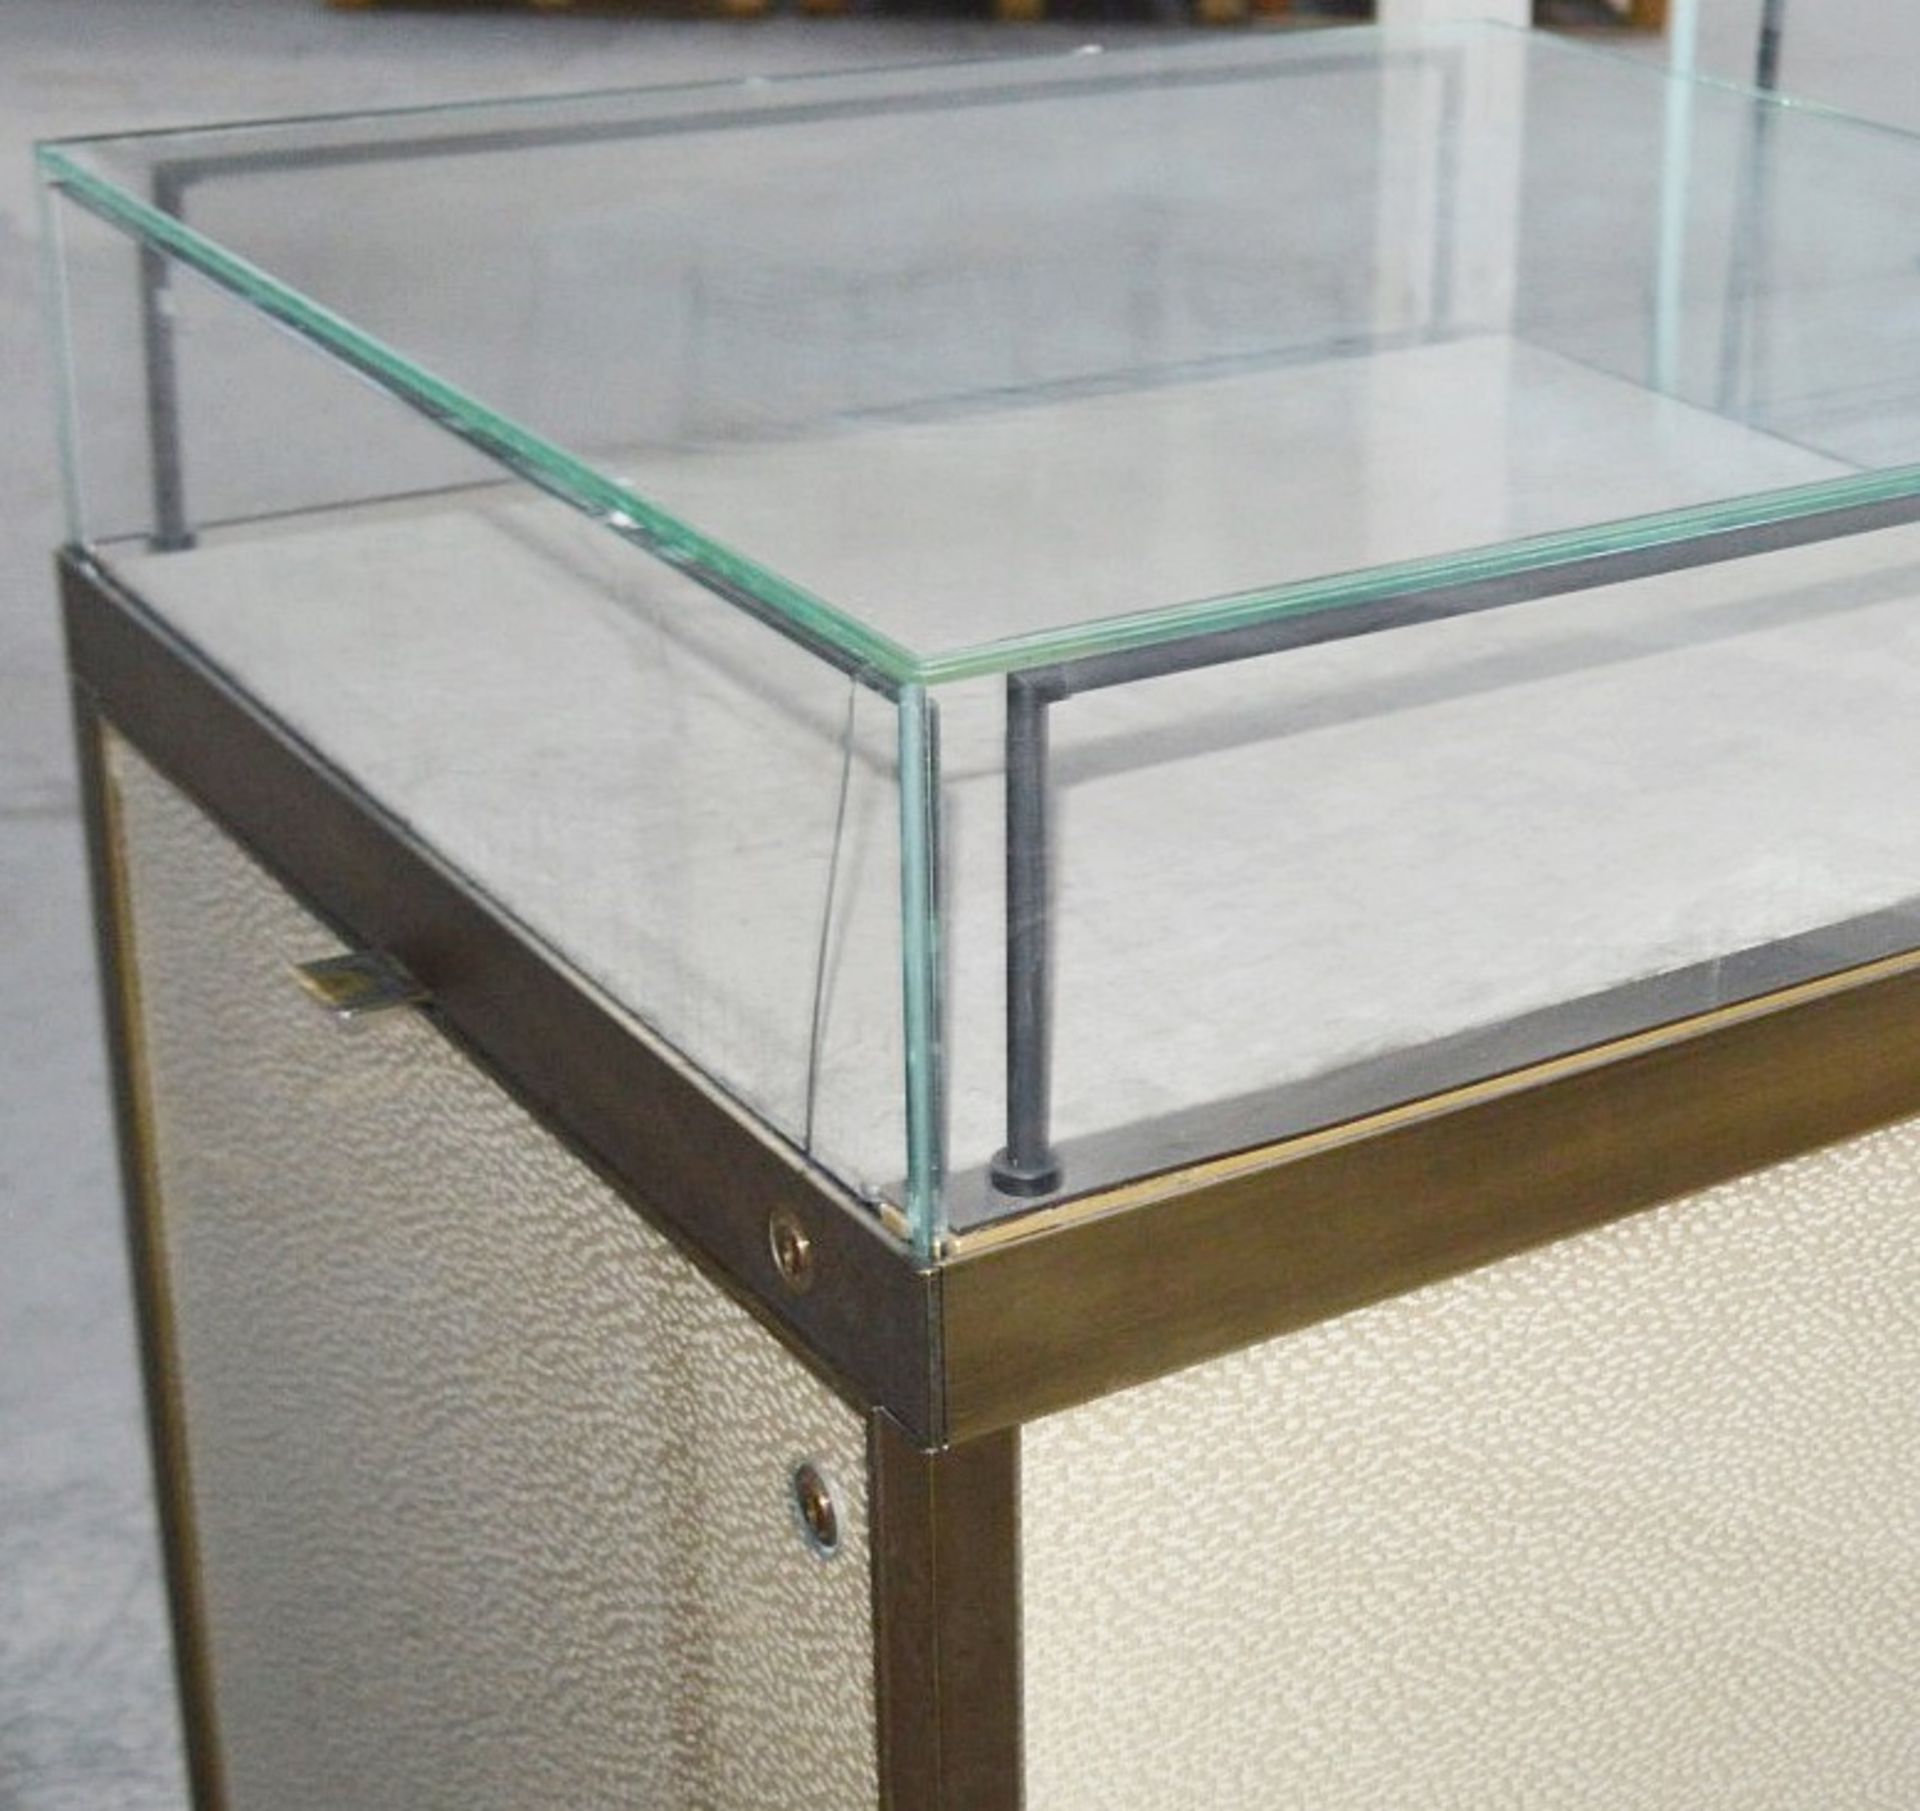 1 x Luxury Double Cabinet Glass Display Case - Dimensions: H124 x W100 x D65cm - Ex-Showroom Piece - Image 6 of 9